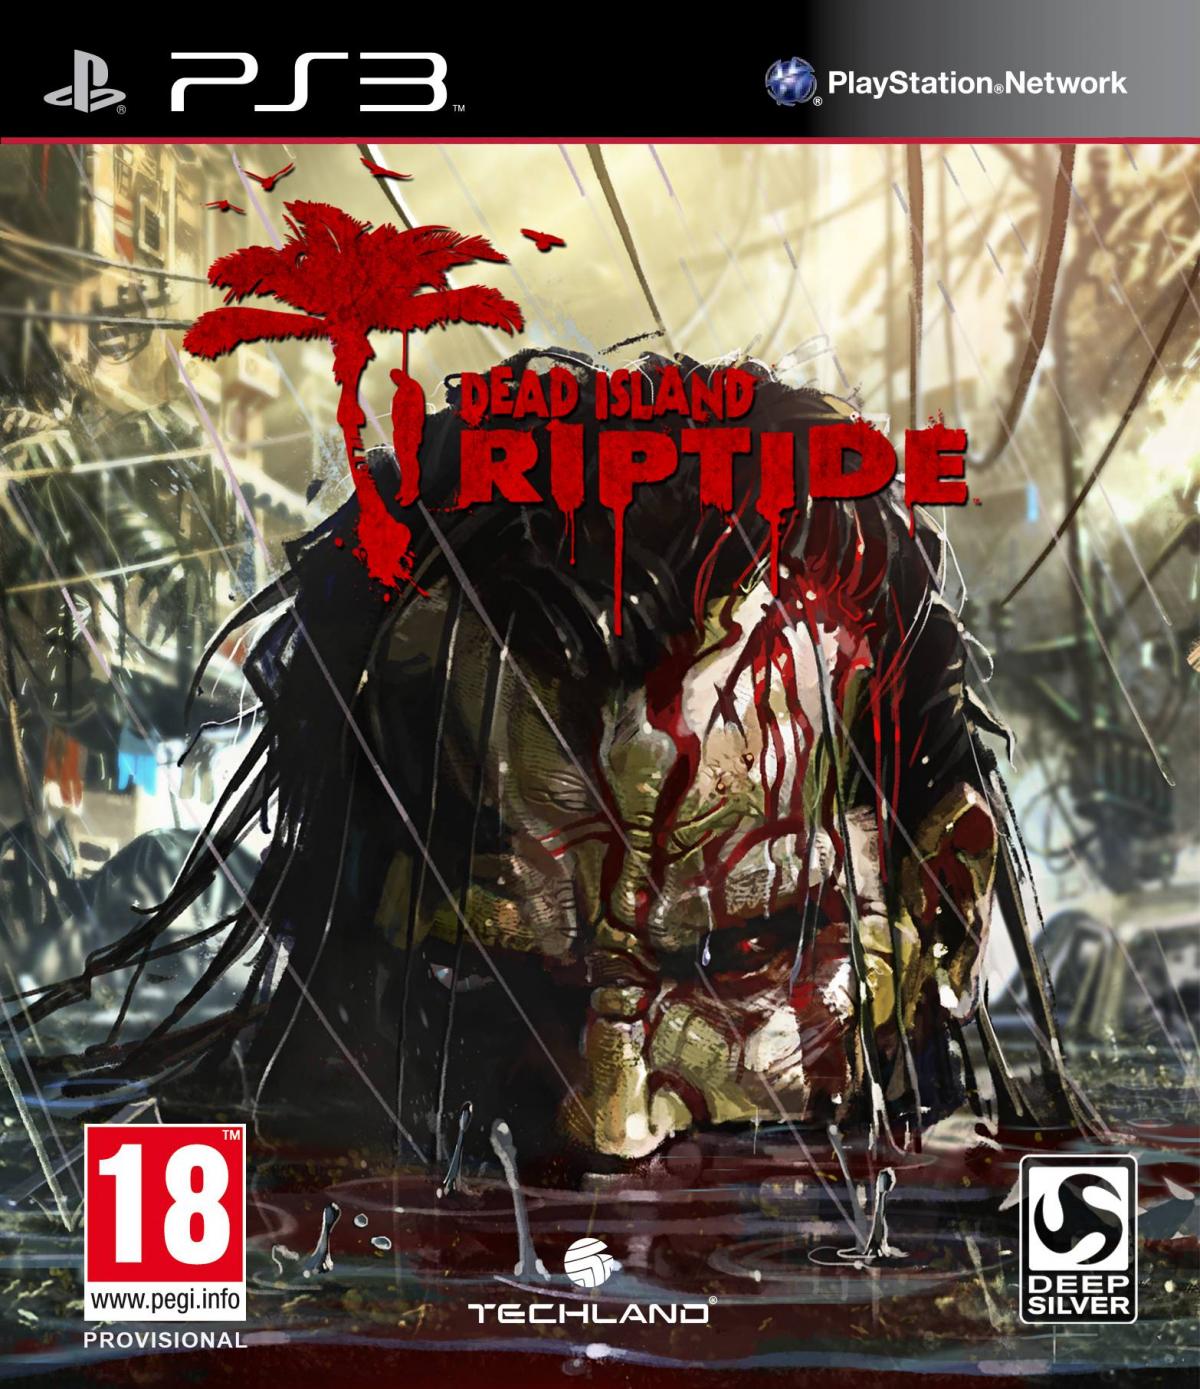 Get Your Zombie Slaying Fix Right Here With Deep Silver S New Dead Island Riptide Game Kidderminster Shuttle